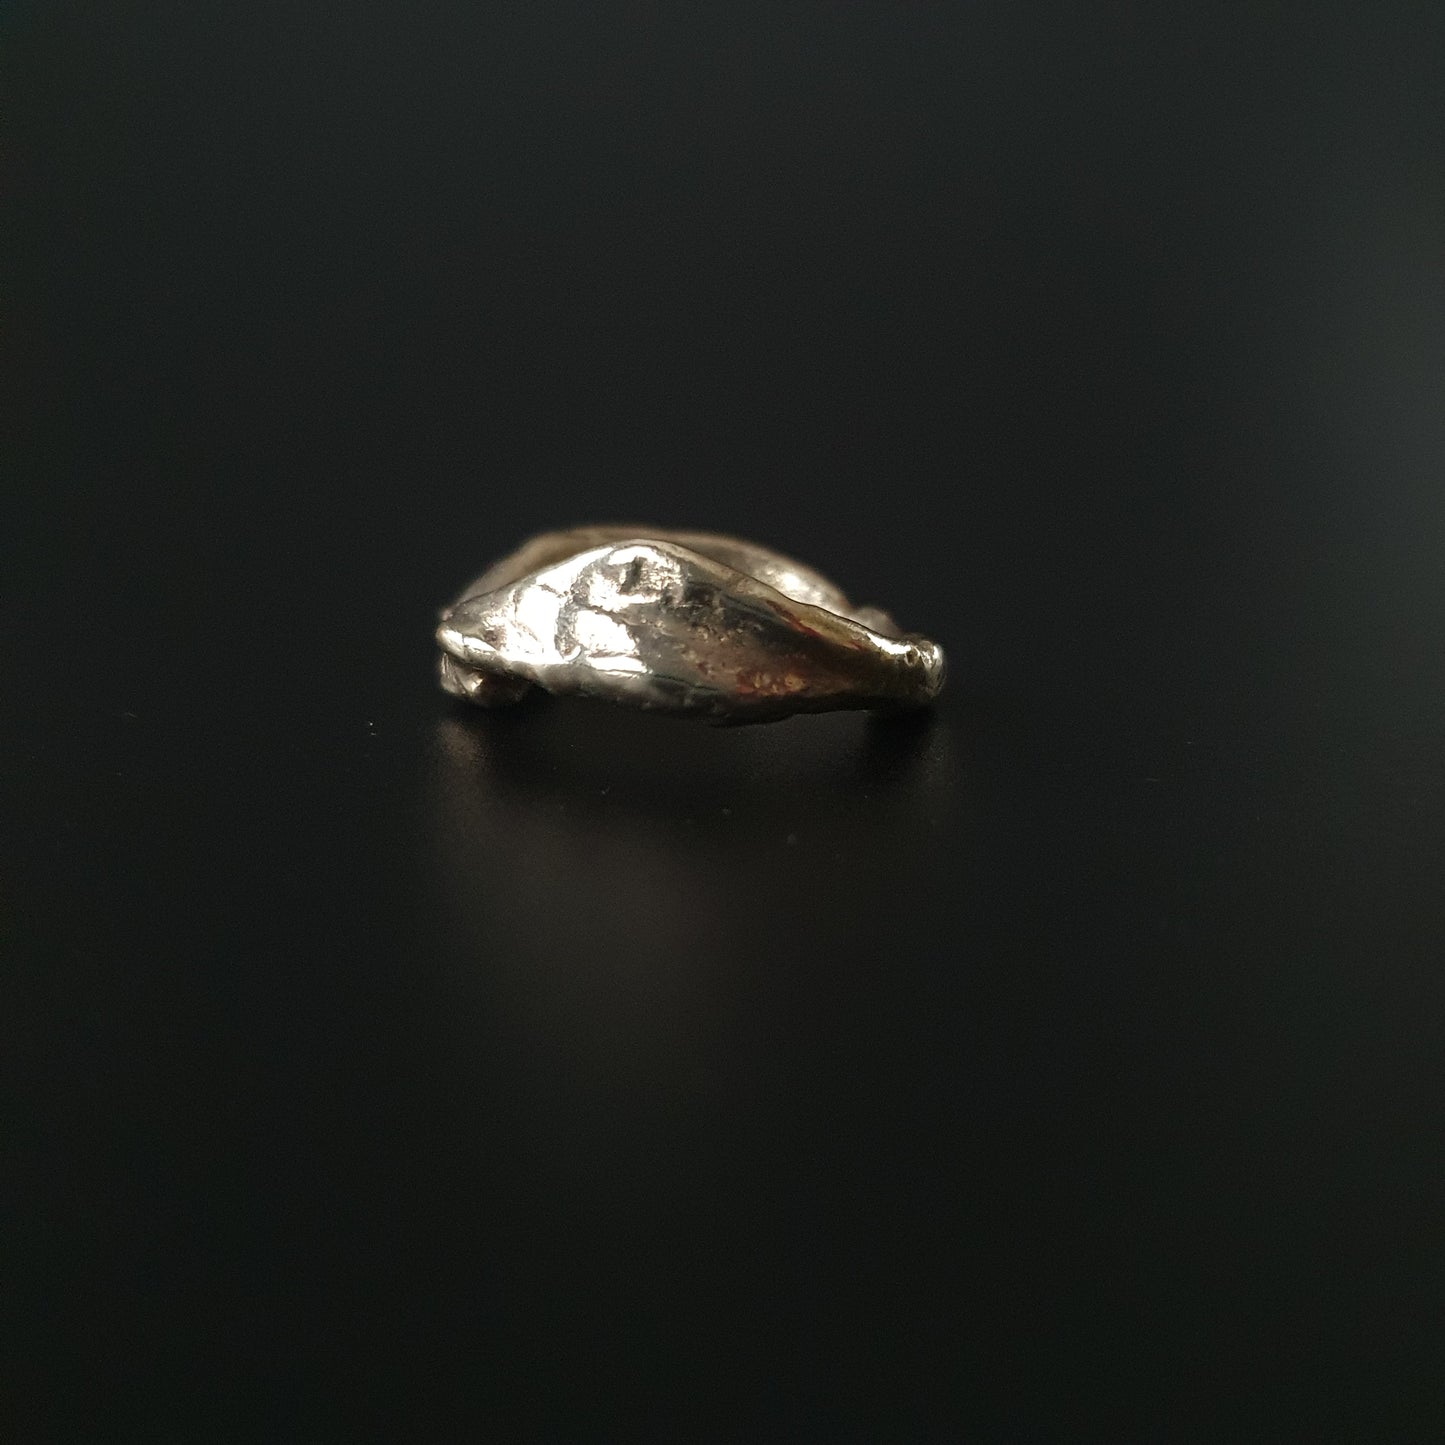 18ct gold plated, Silver ring, sterling, statement, eye catching, bold,chunky ring,brutalist,art jewelry, gifts, unique,edgy, unconventional, abstract, rough